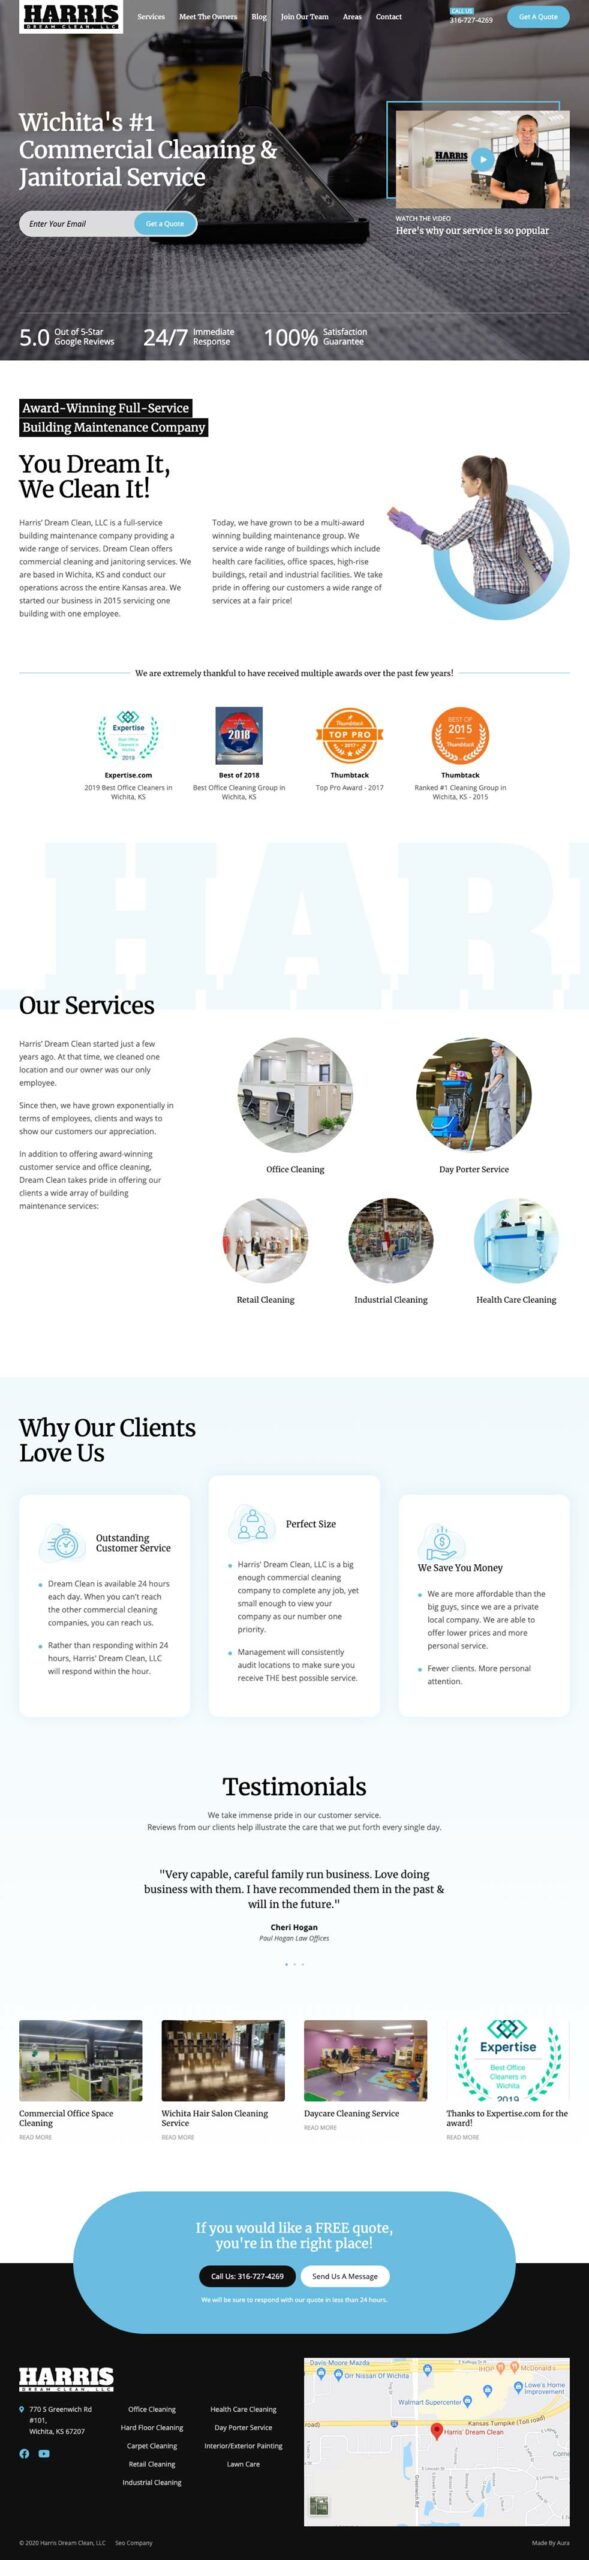 Web Design For An Office Cleaning Company